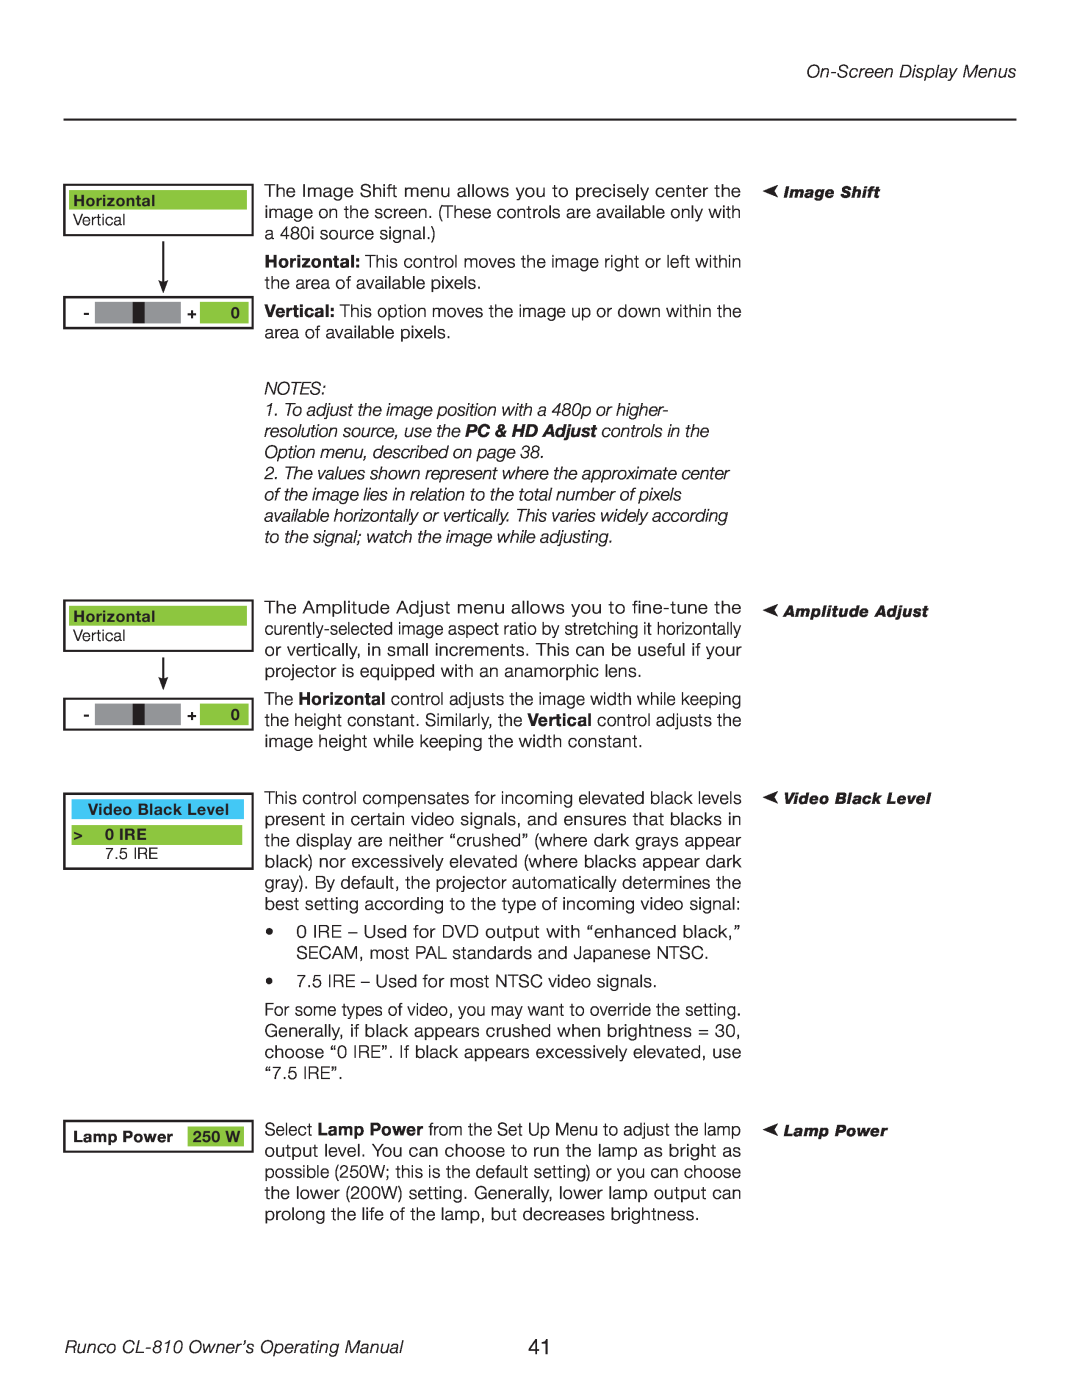 Runco manual On-Screen Display Menus, IRE - Used for most NTSC video signals, Runco CL-810 Owner’s Operating Manual 